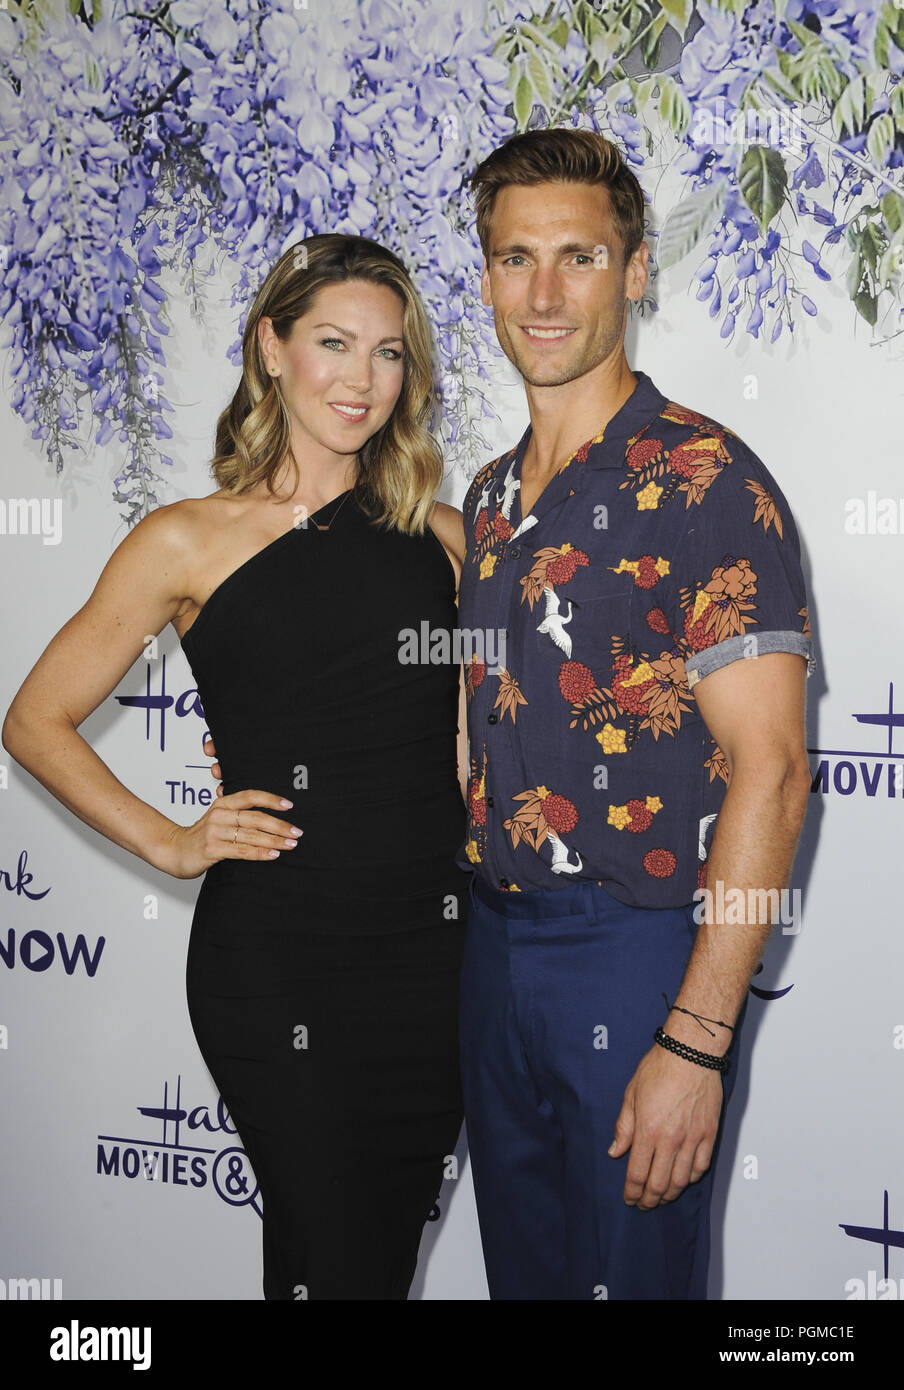 Hallmark Channel Summer Party 2018 Featuring: Cassandra Troy, Andrew Walker  Where: Los Angeles, California, United States When: 27 Jul 2018 Credit:  Apega/WENN.com Stock Photo - Alamy